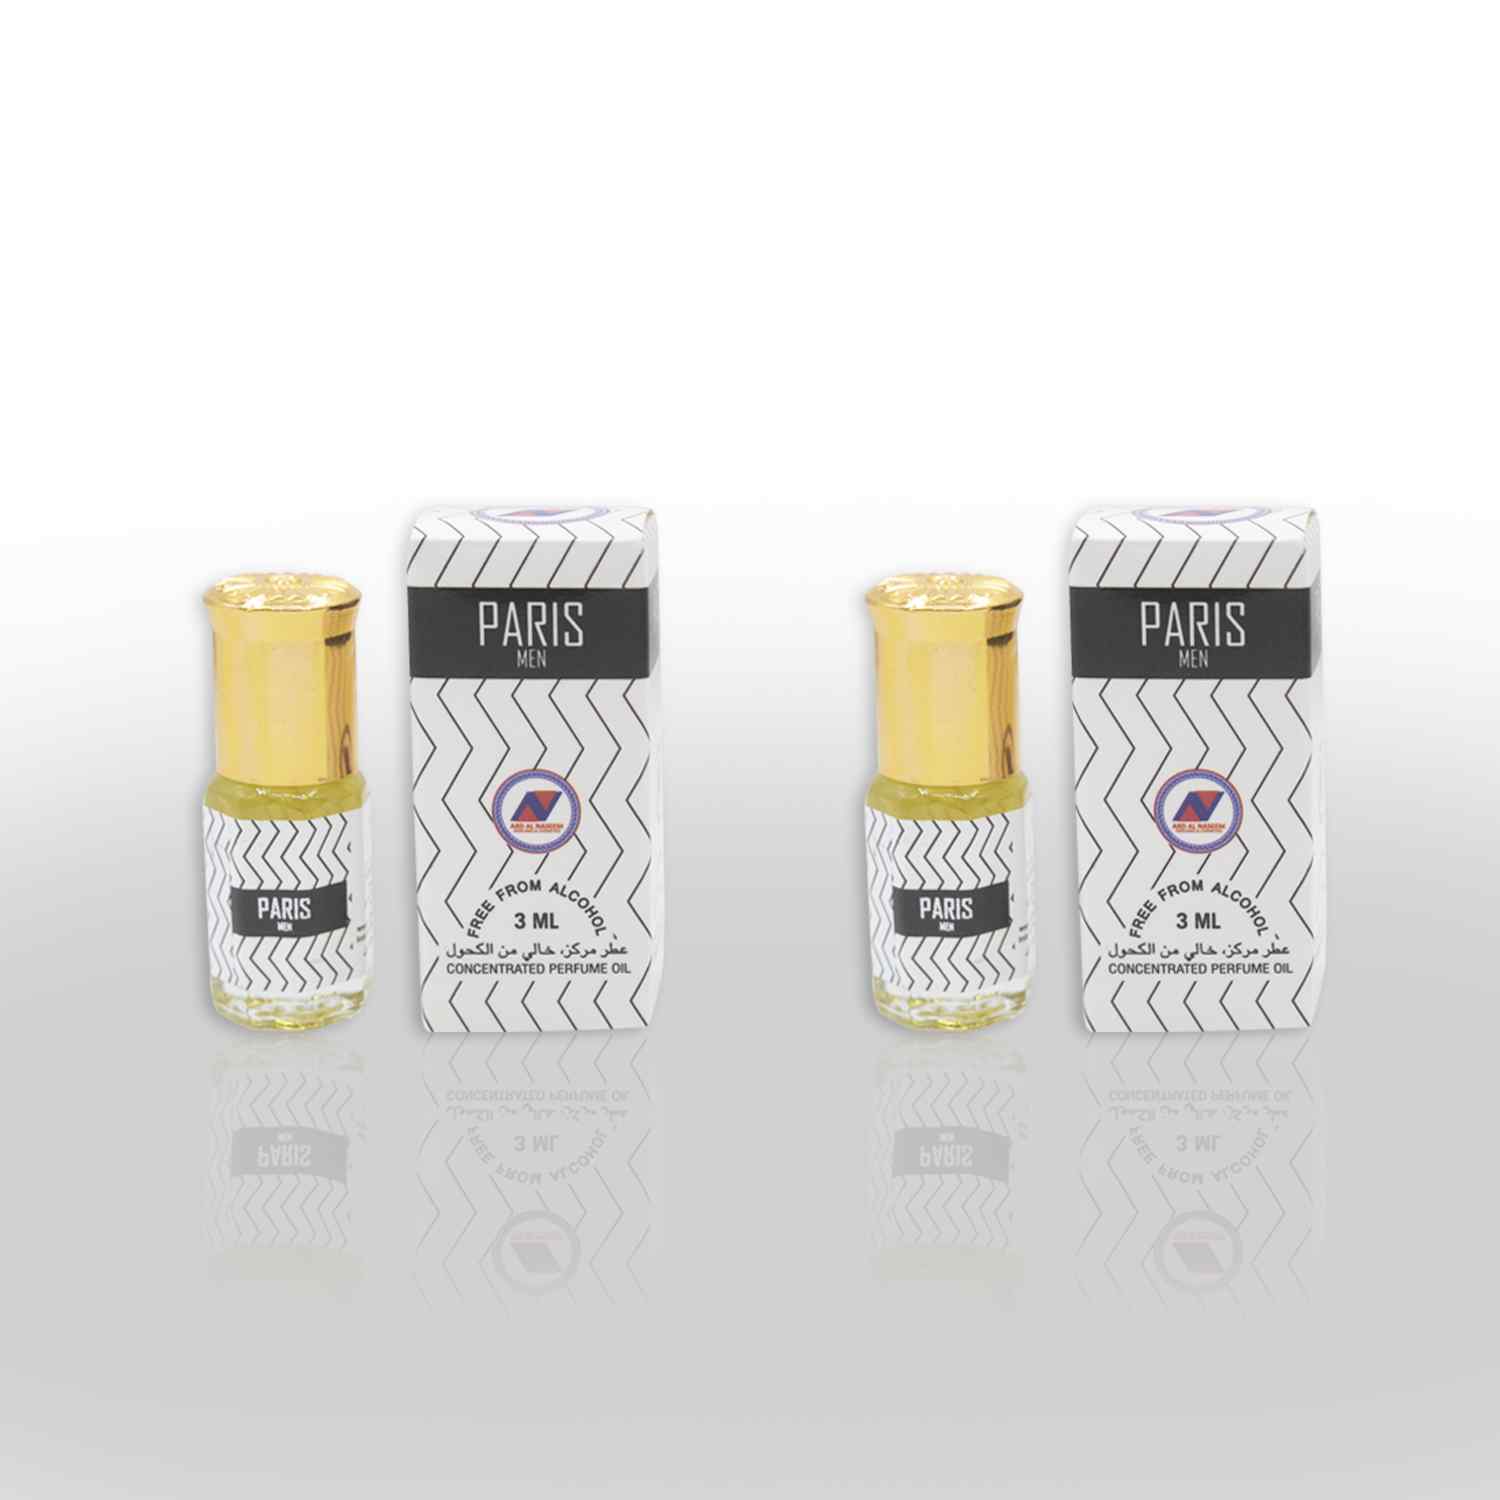 Paris Men concentrated oil attar 3ml by ard perfumes